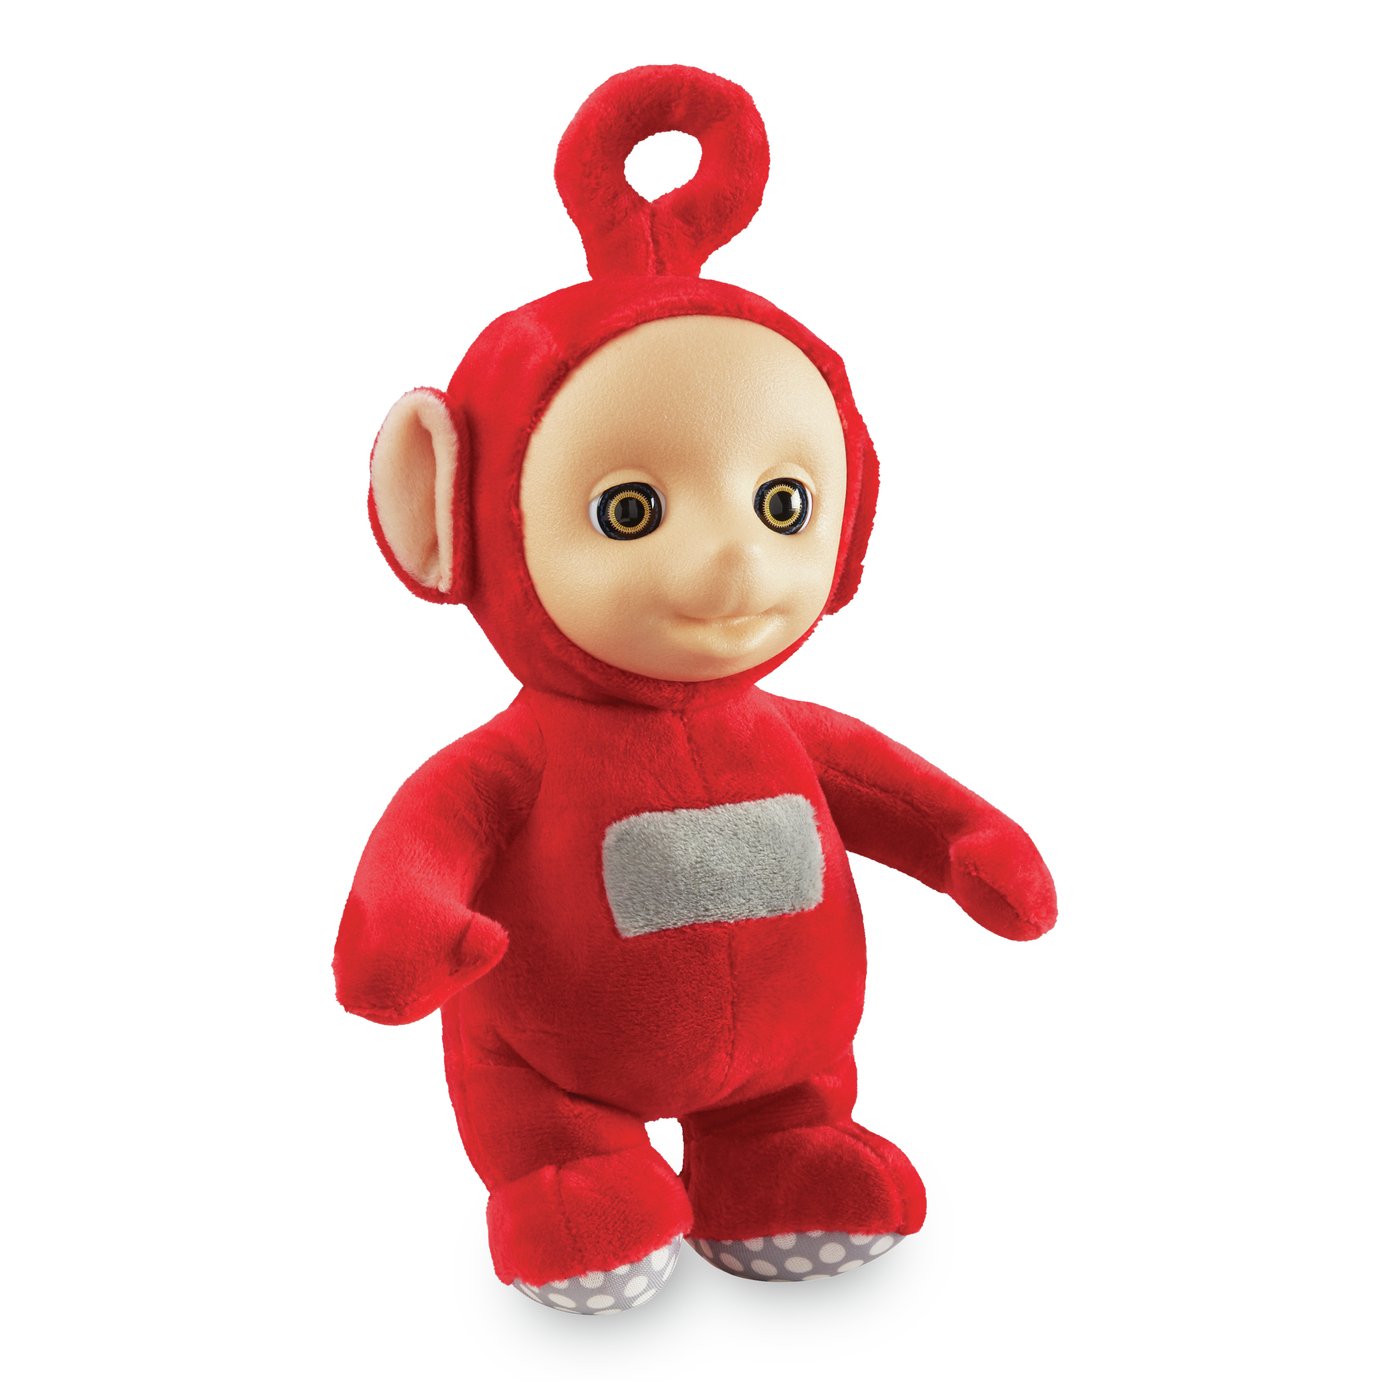 Teletubbies Talking Po Soft Toy review